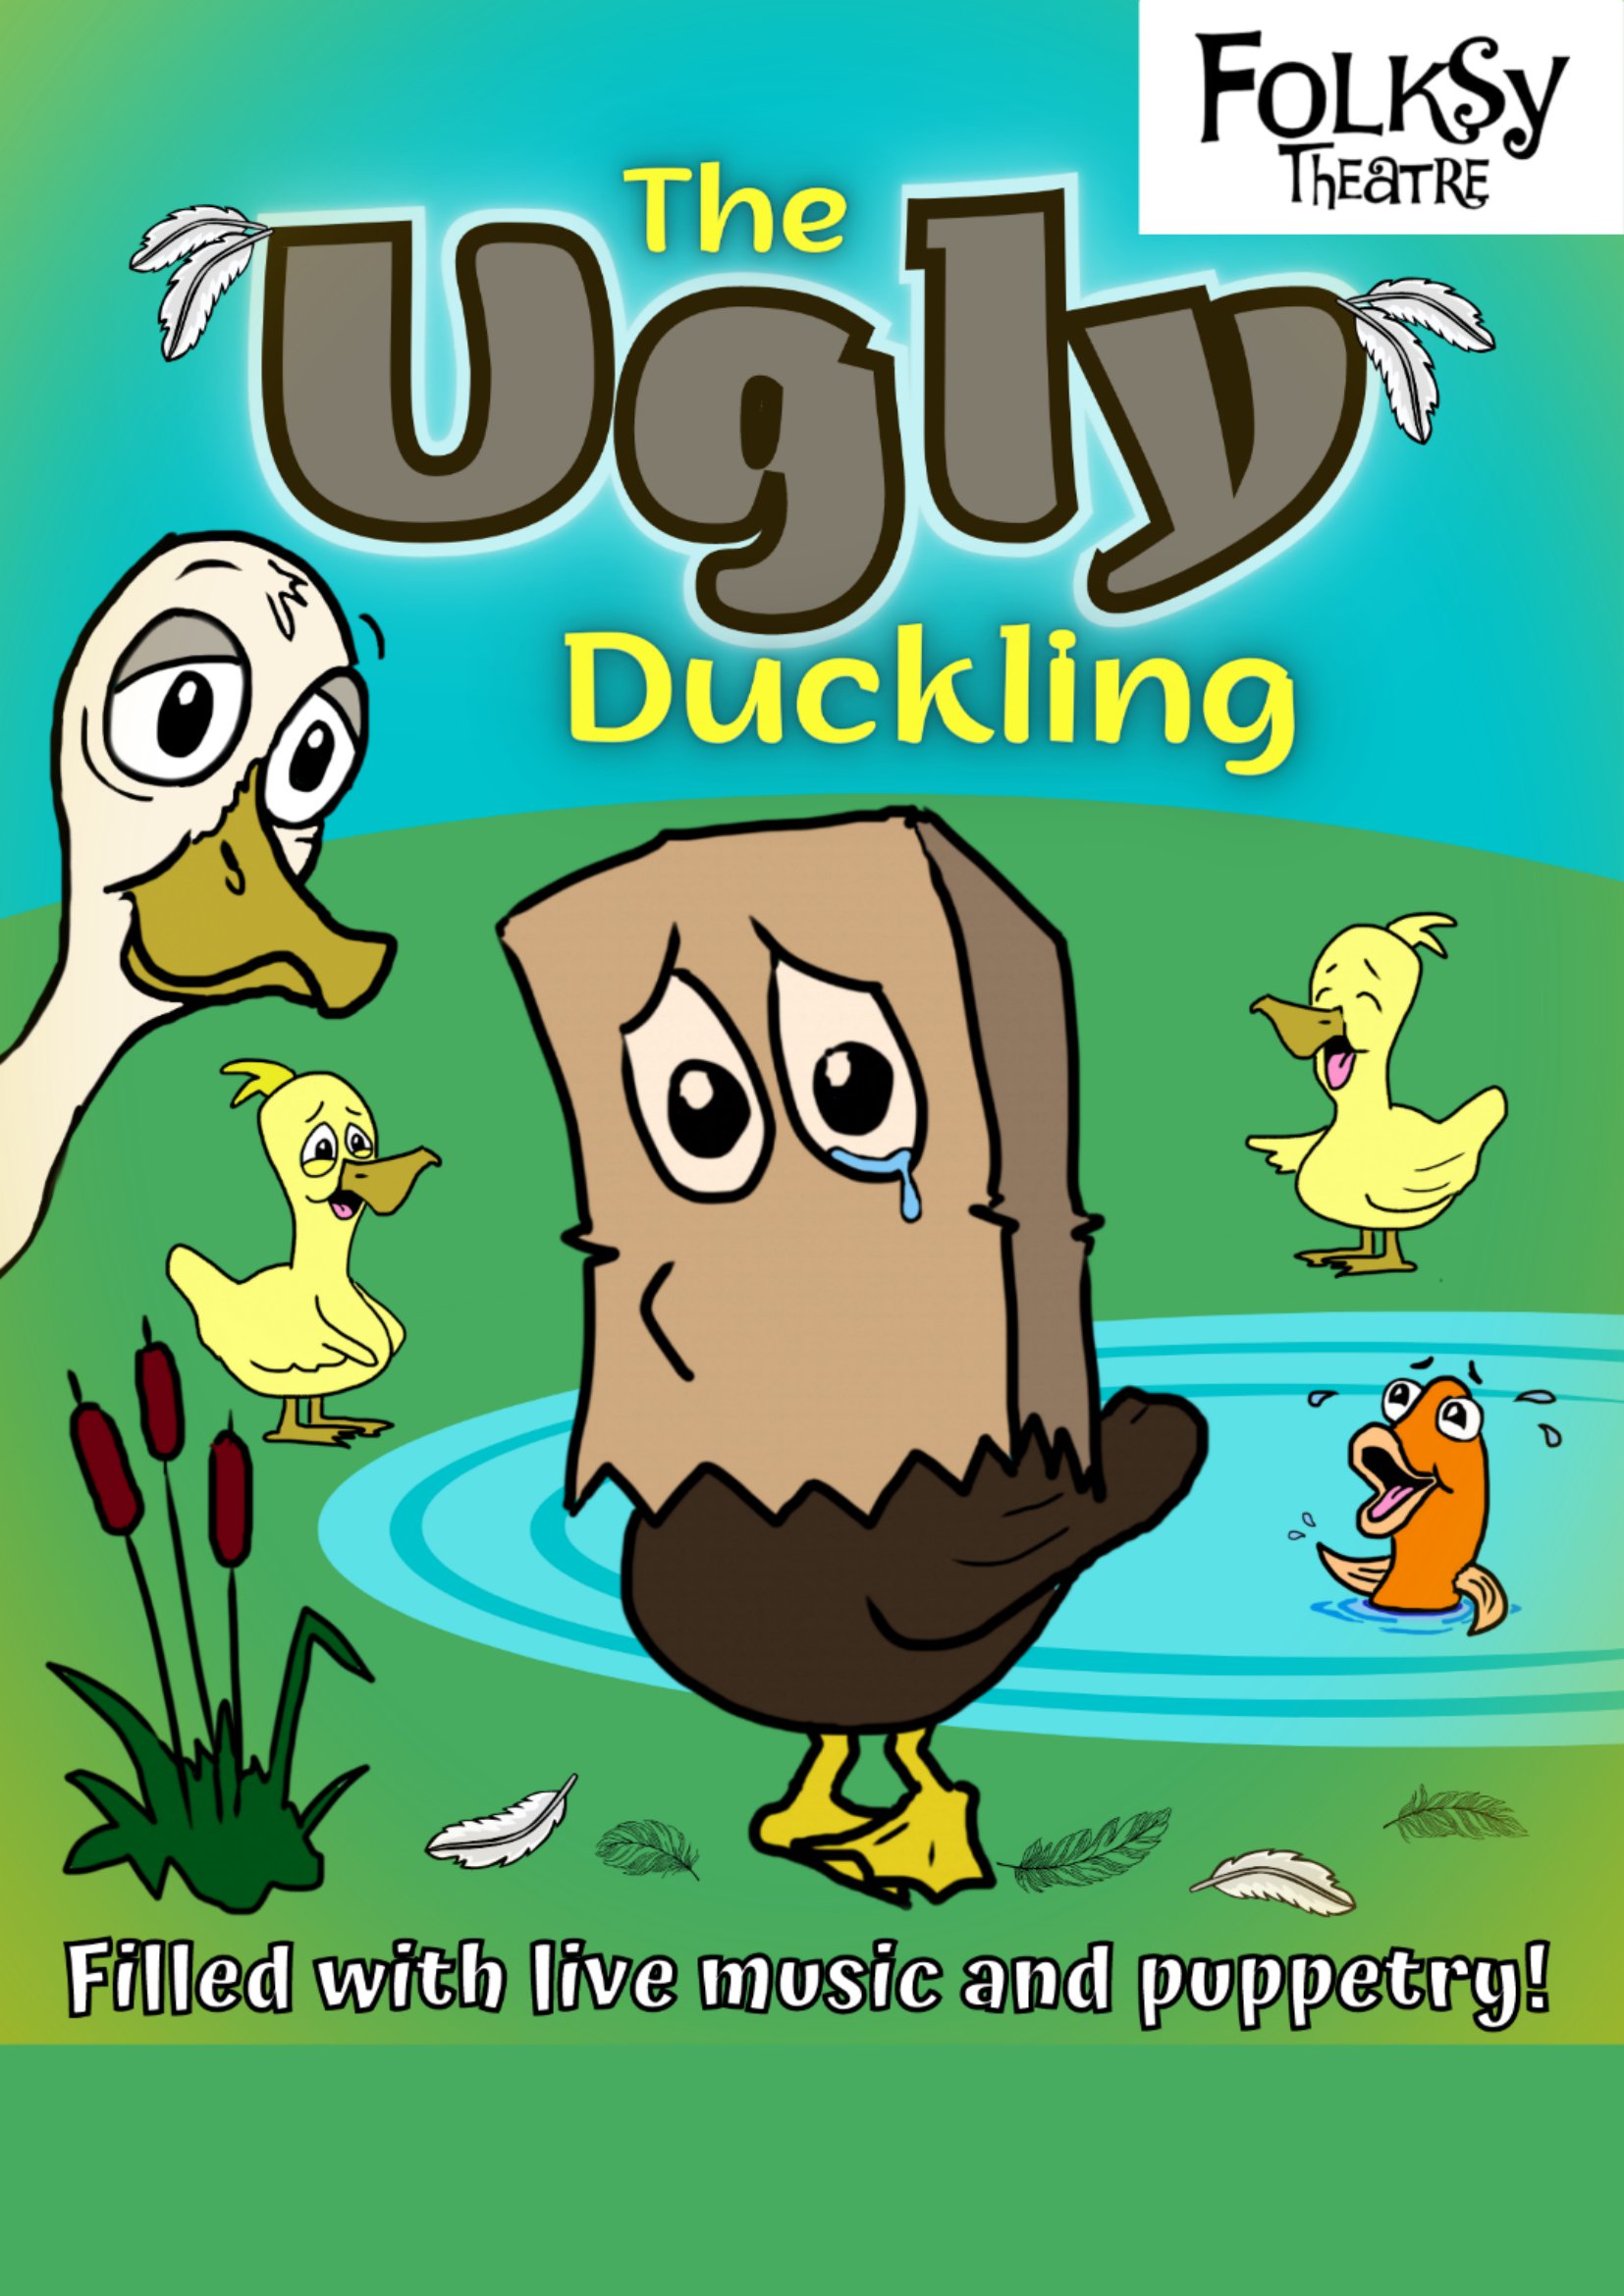 Ugly duckling poster